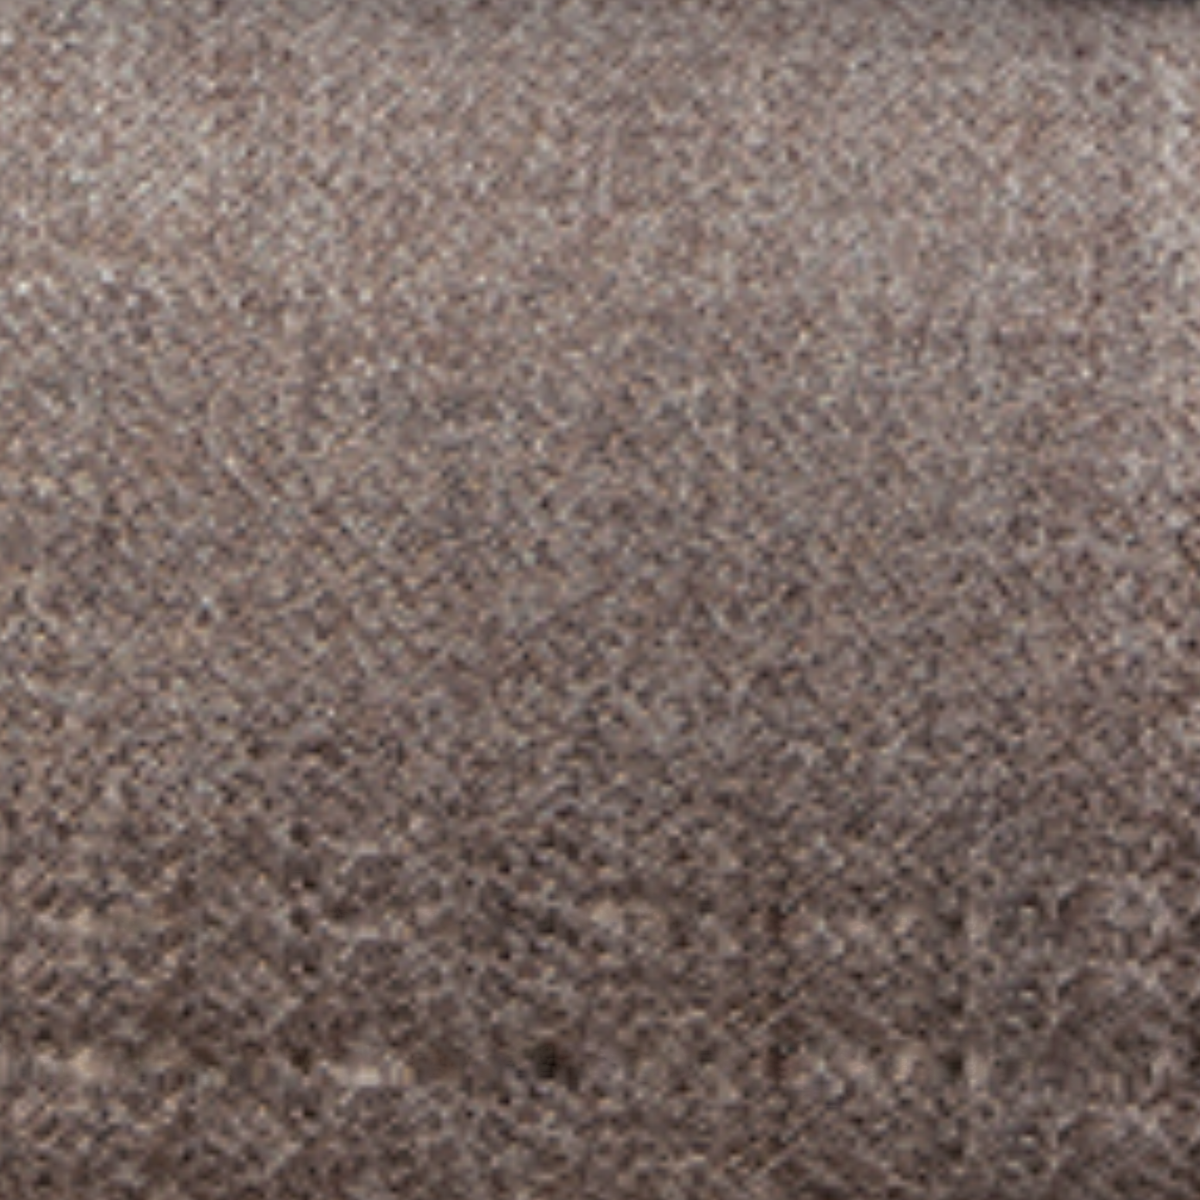 Swatch Sample of Downtown Company Alpaca Throws in Walnut Color